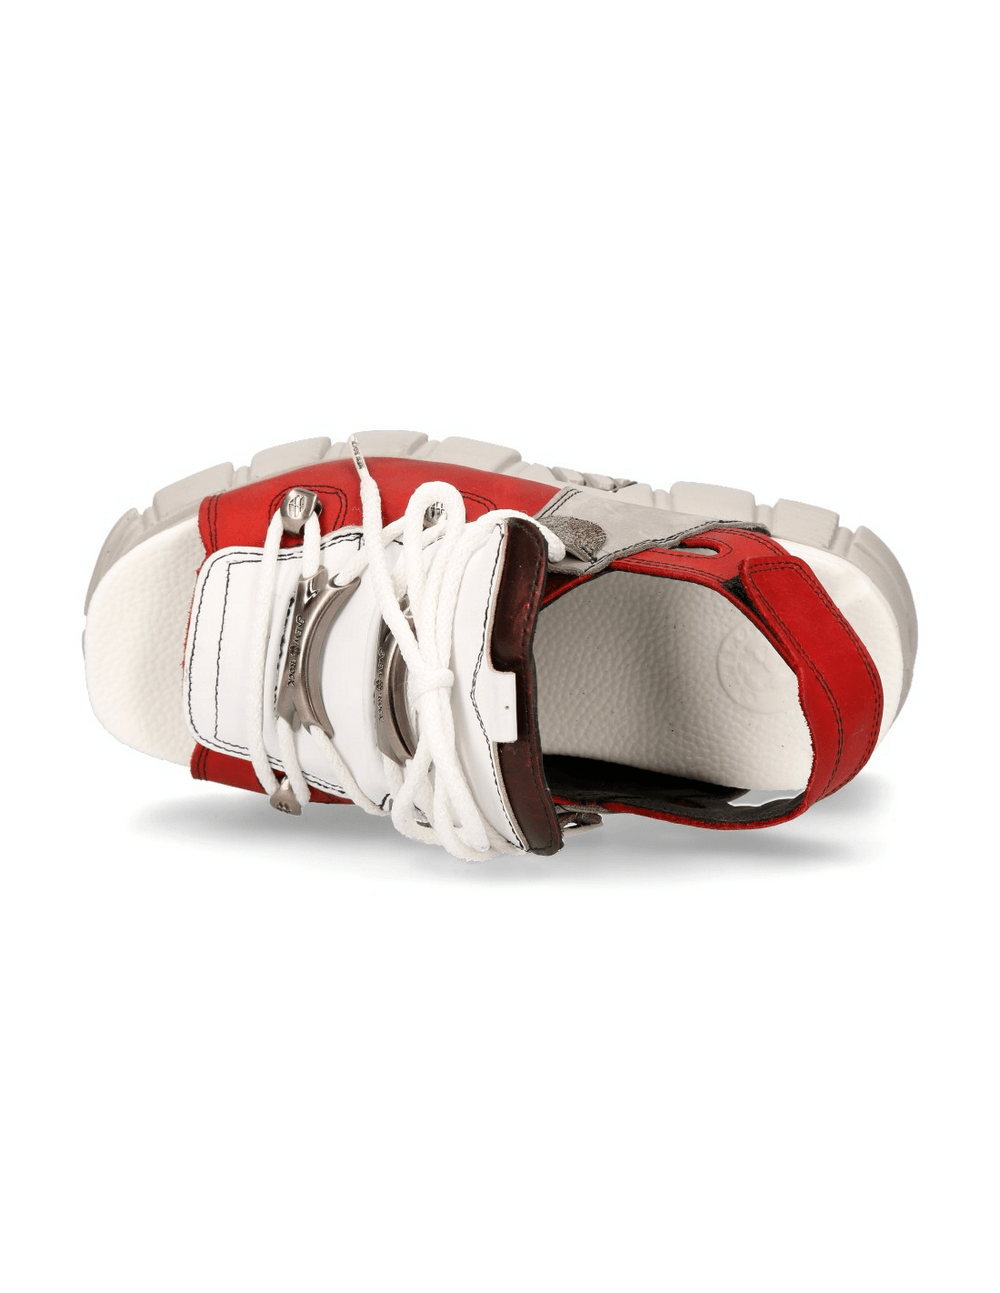 NEW ROCK Red and Gray Chunky Sole Rock Sandals